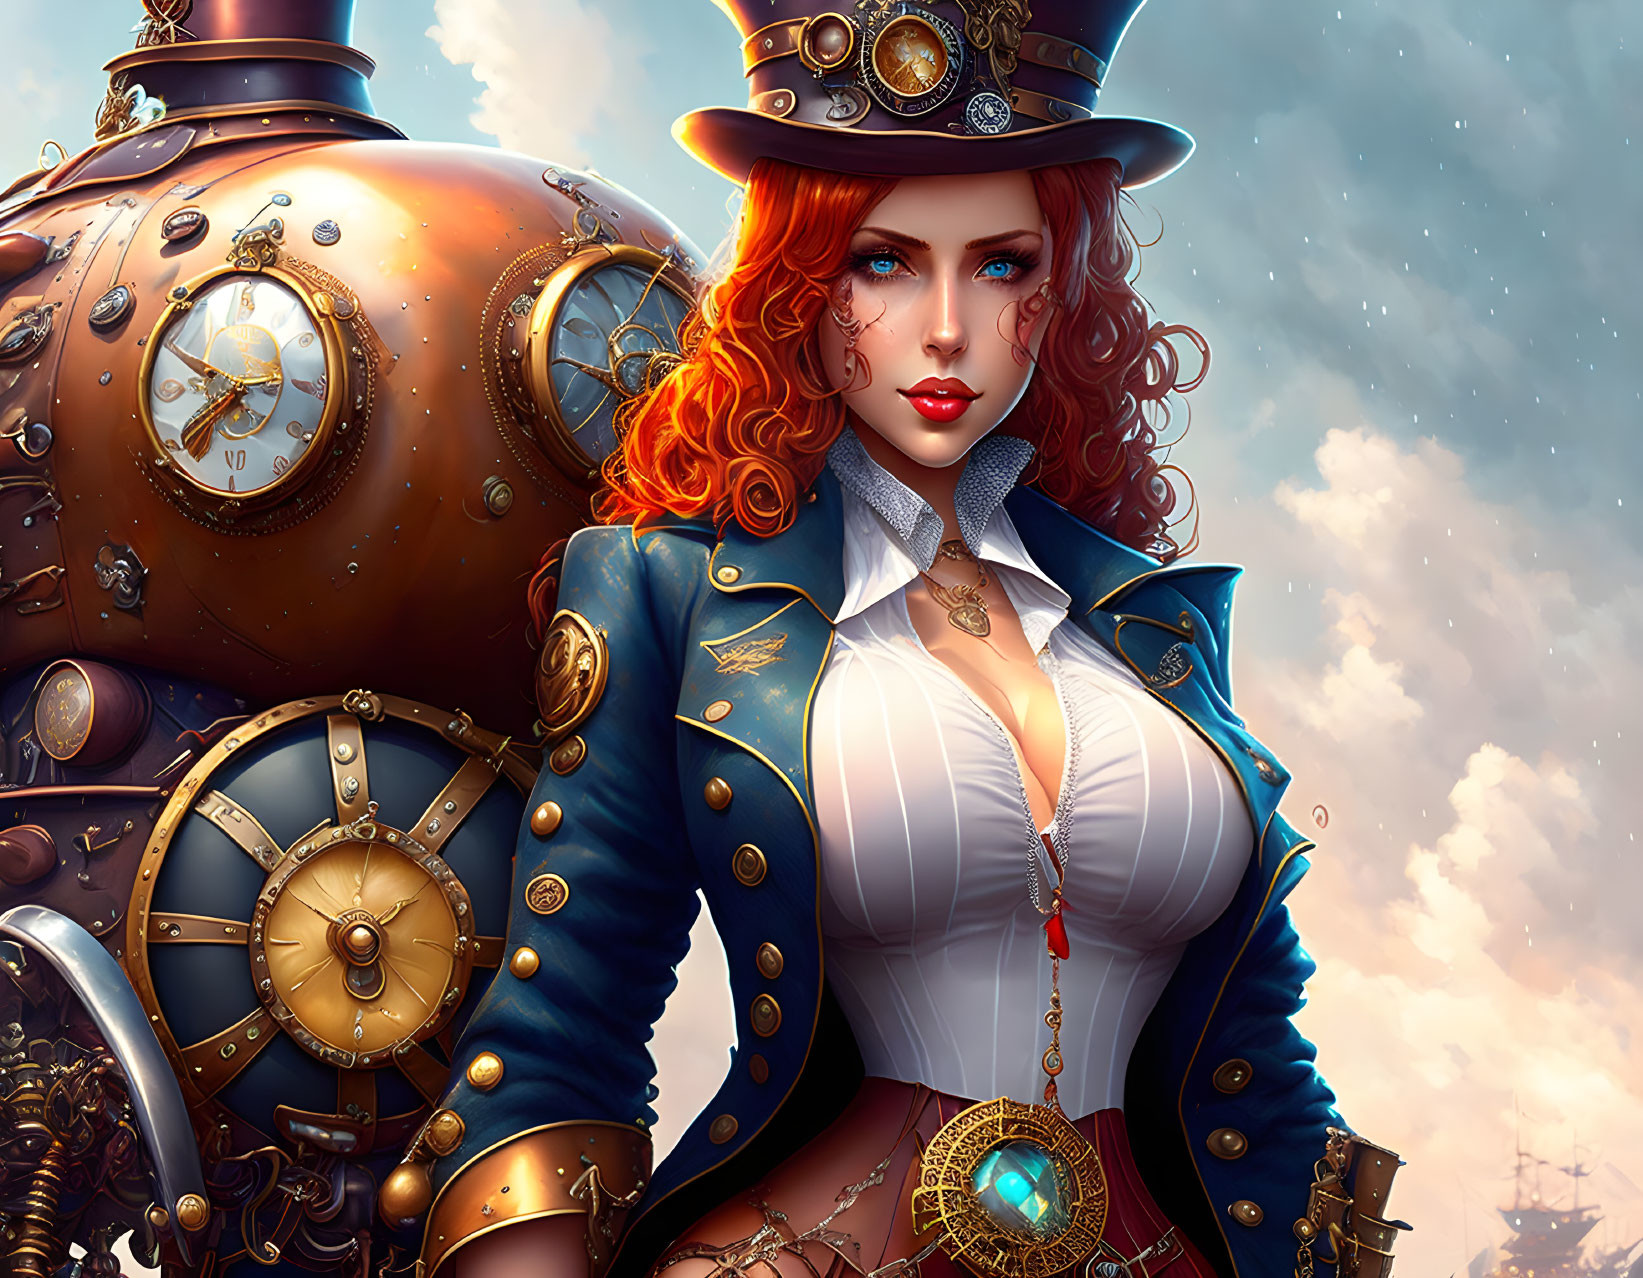 Steampunk-themed illustration of woman with red hair and top hat